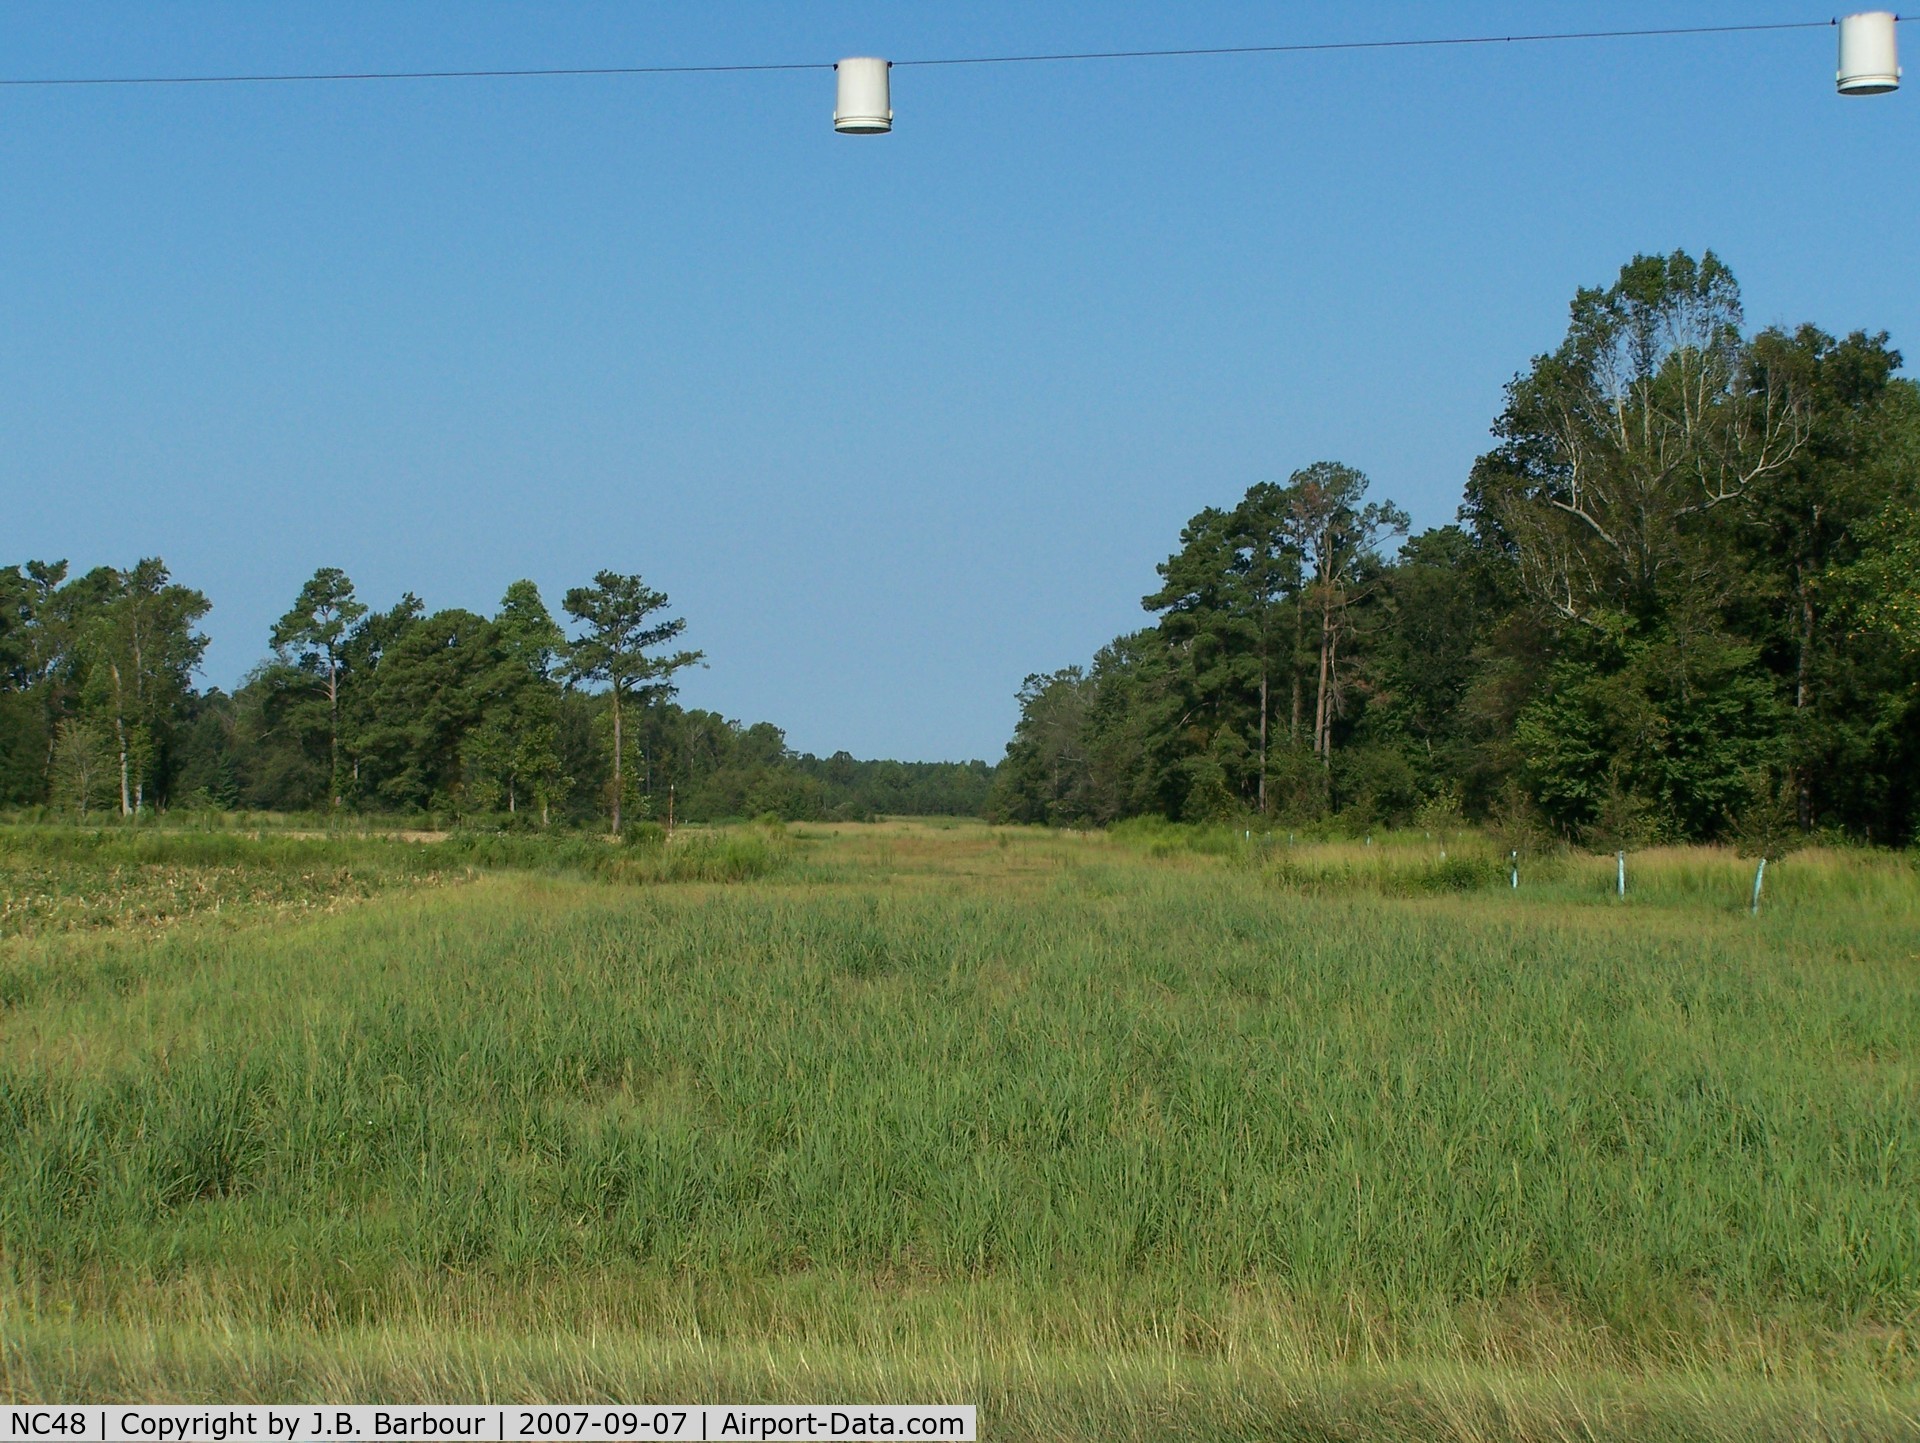 Safe Field Airport (NC48) - This location appeared to be overgrown with weeds and unuseable for some time